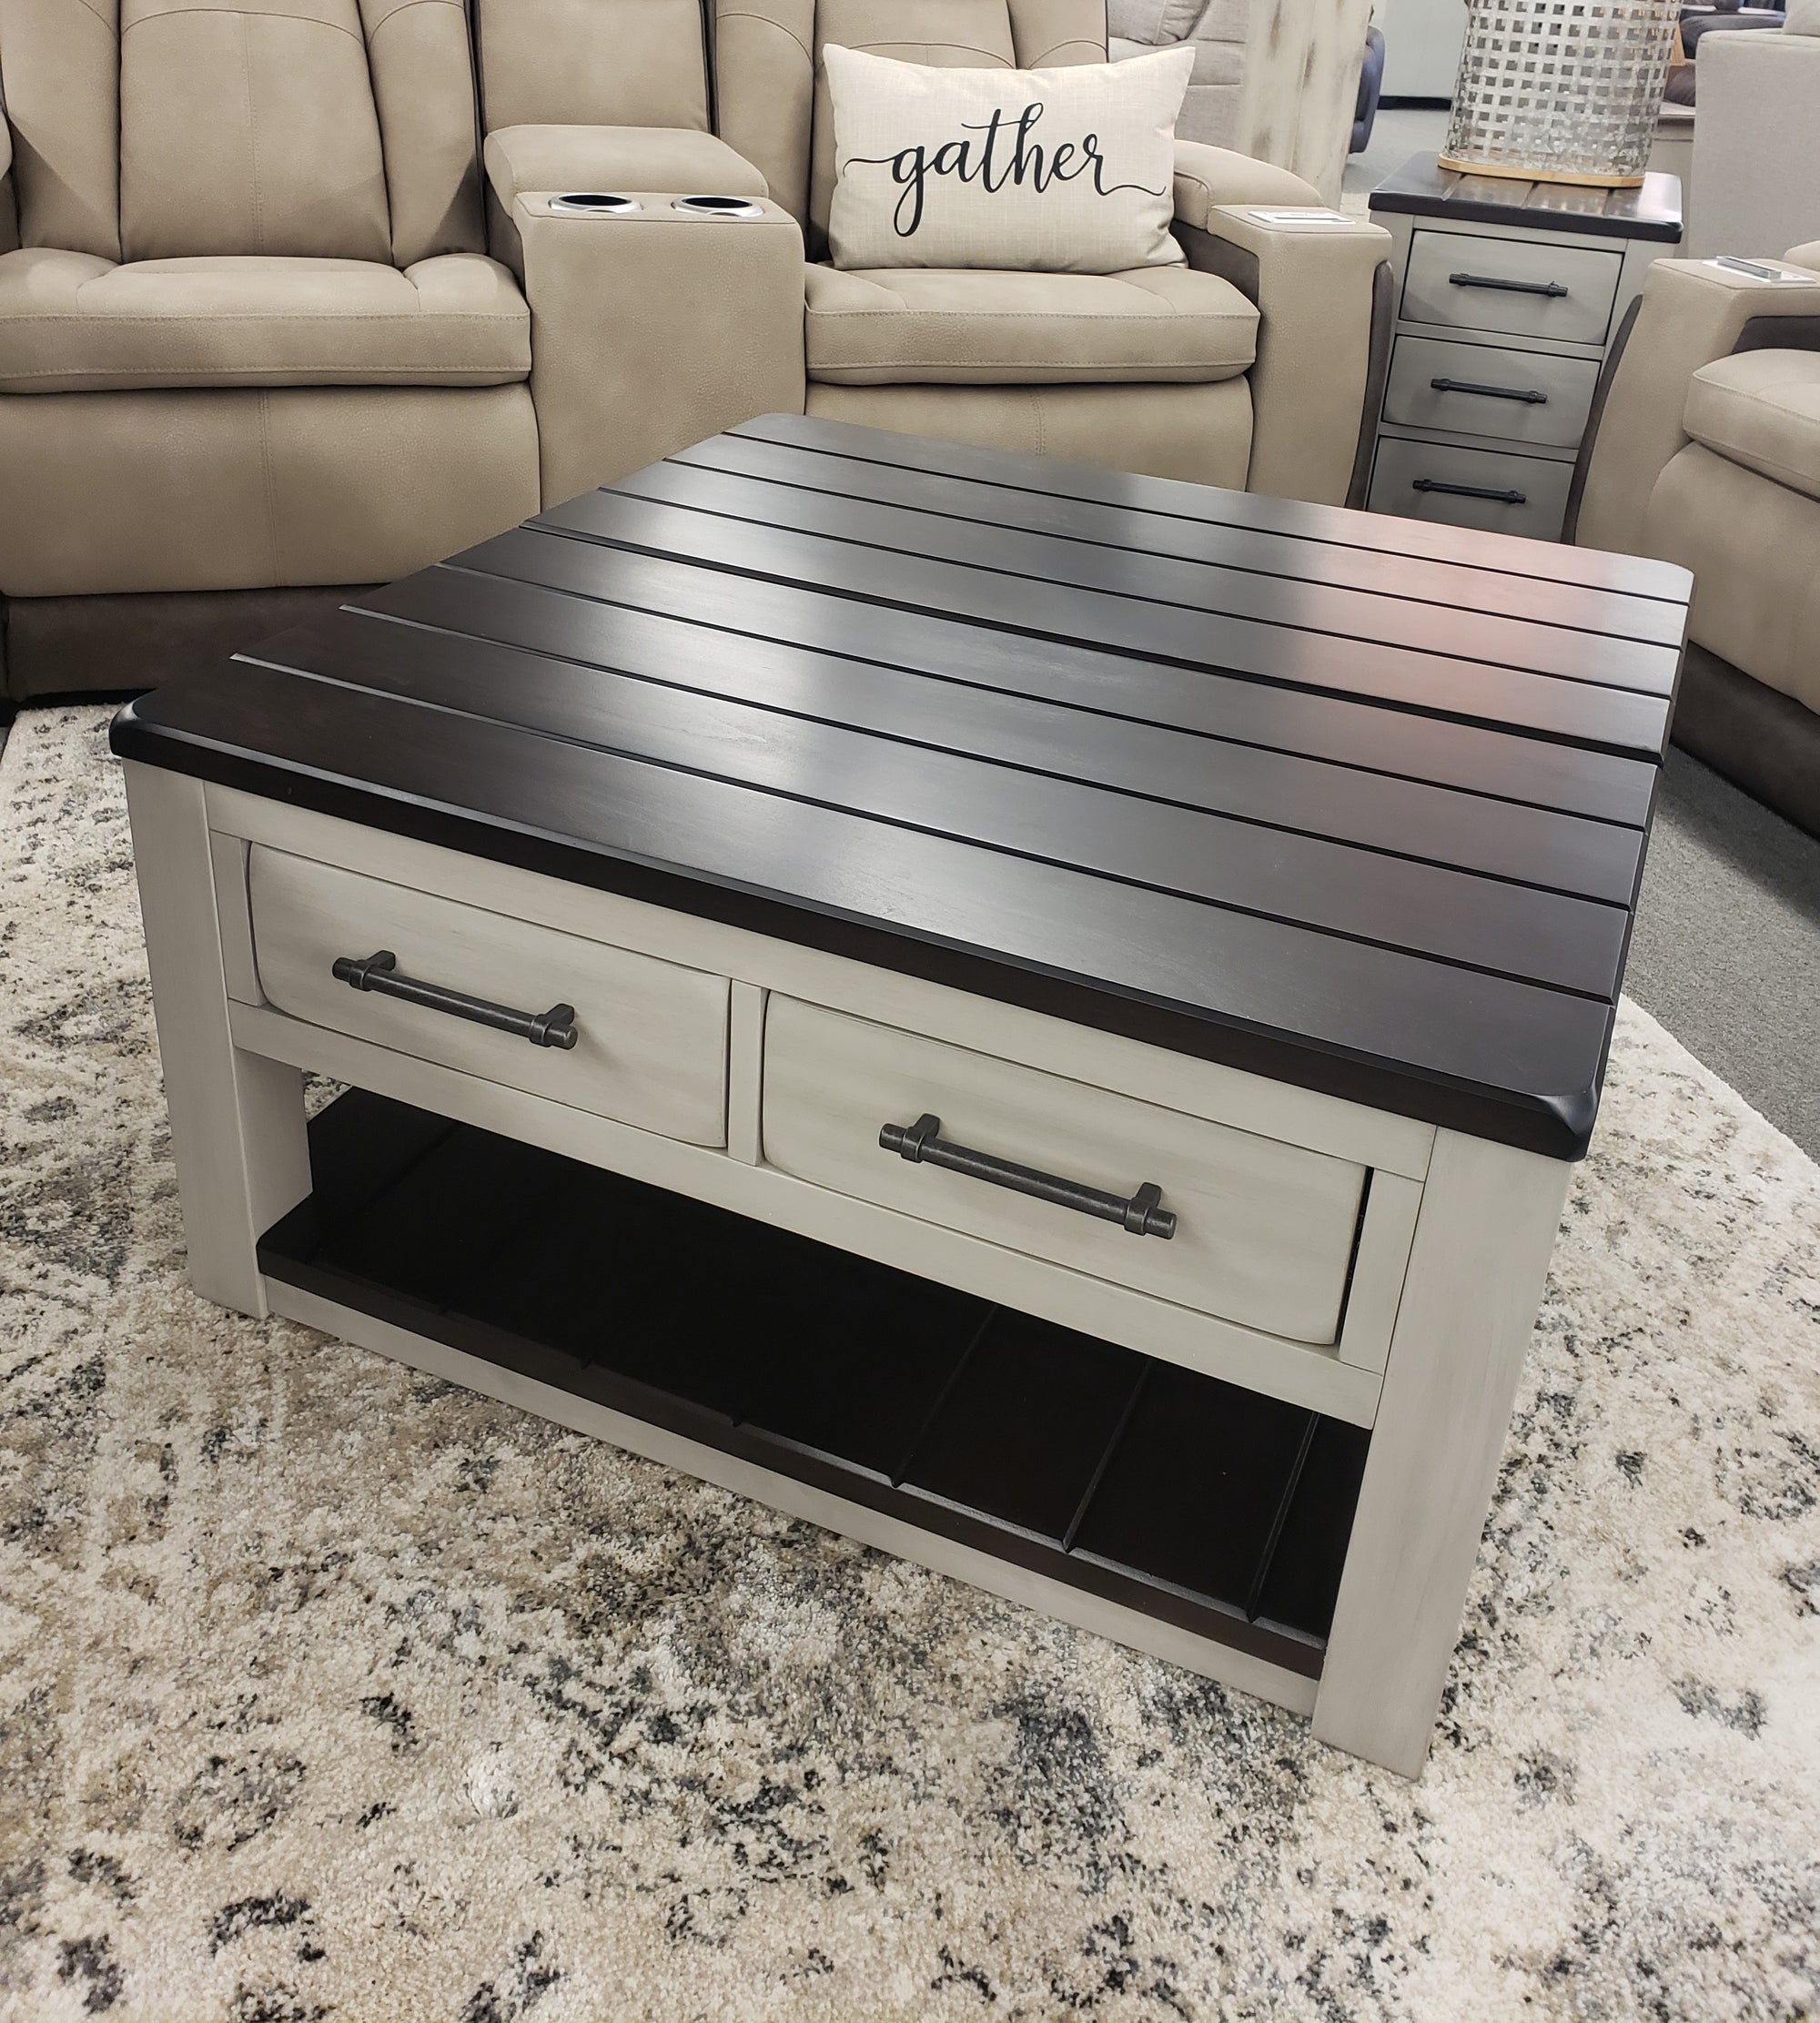 T807 FI-A Coffee Table